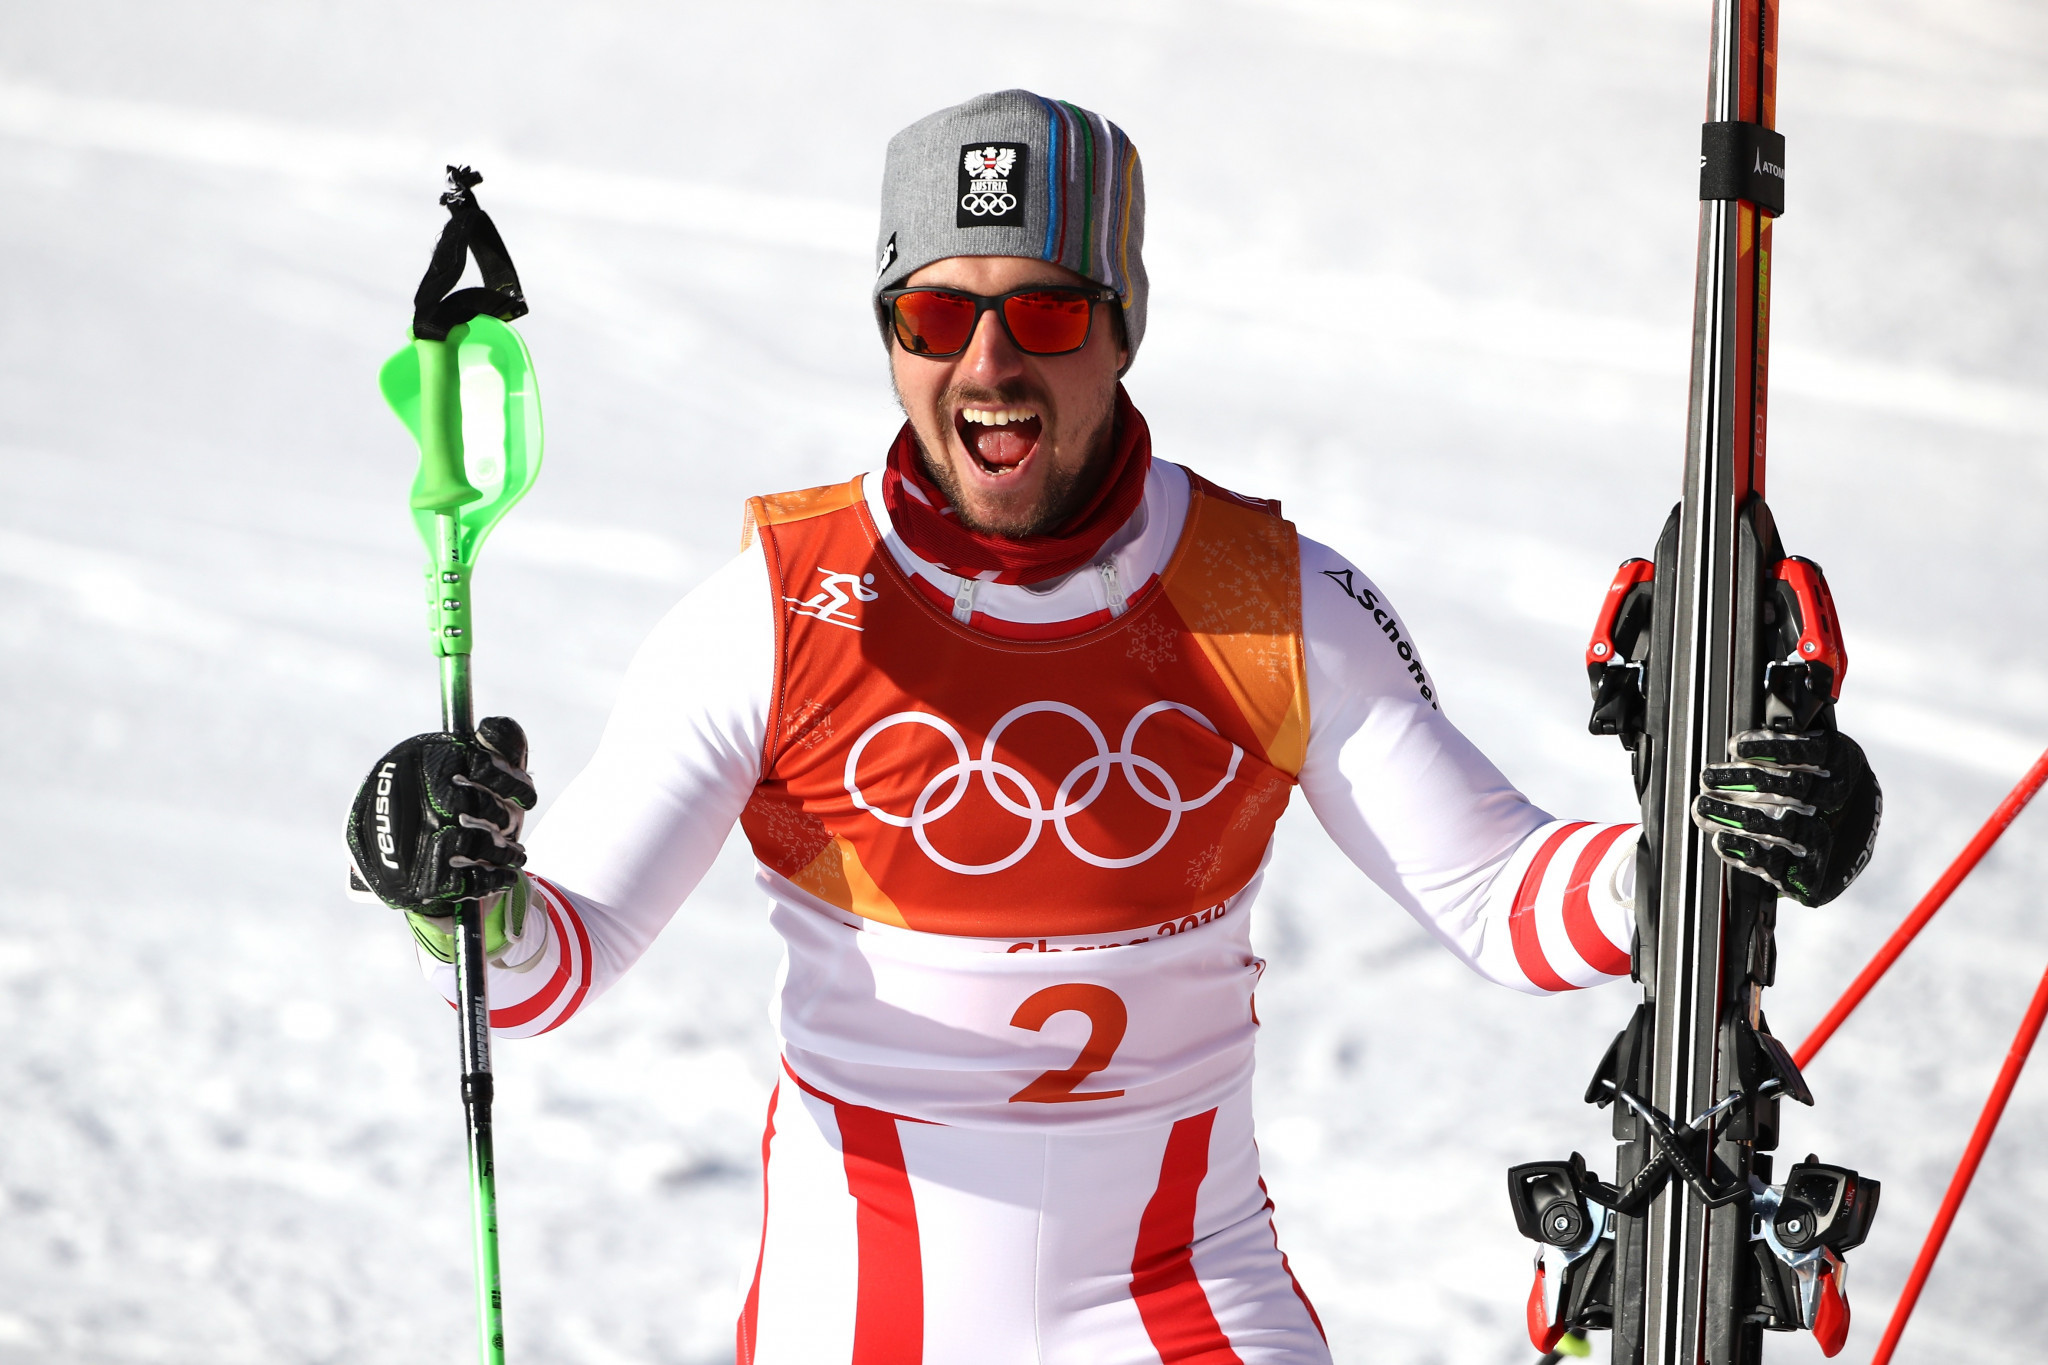 Hirscher ends long wait for Olympic gold with victory in men's Alpine combined at Pyeongchang 2018